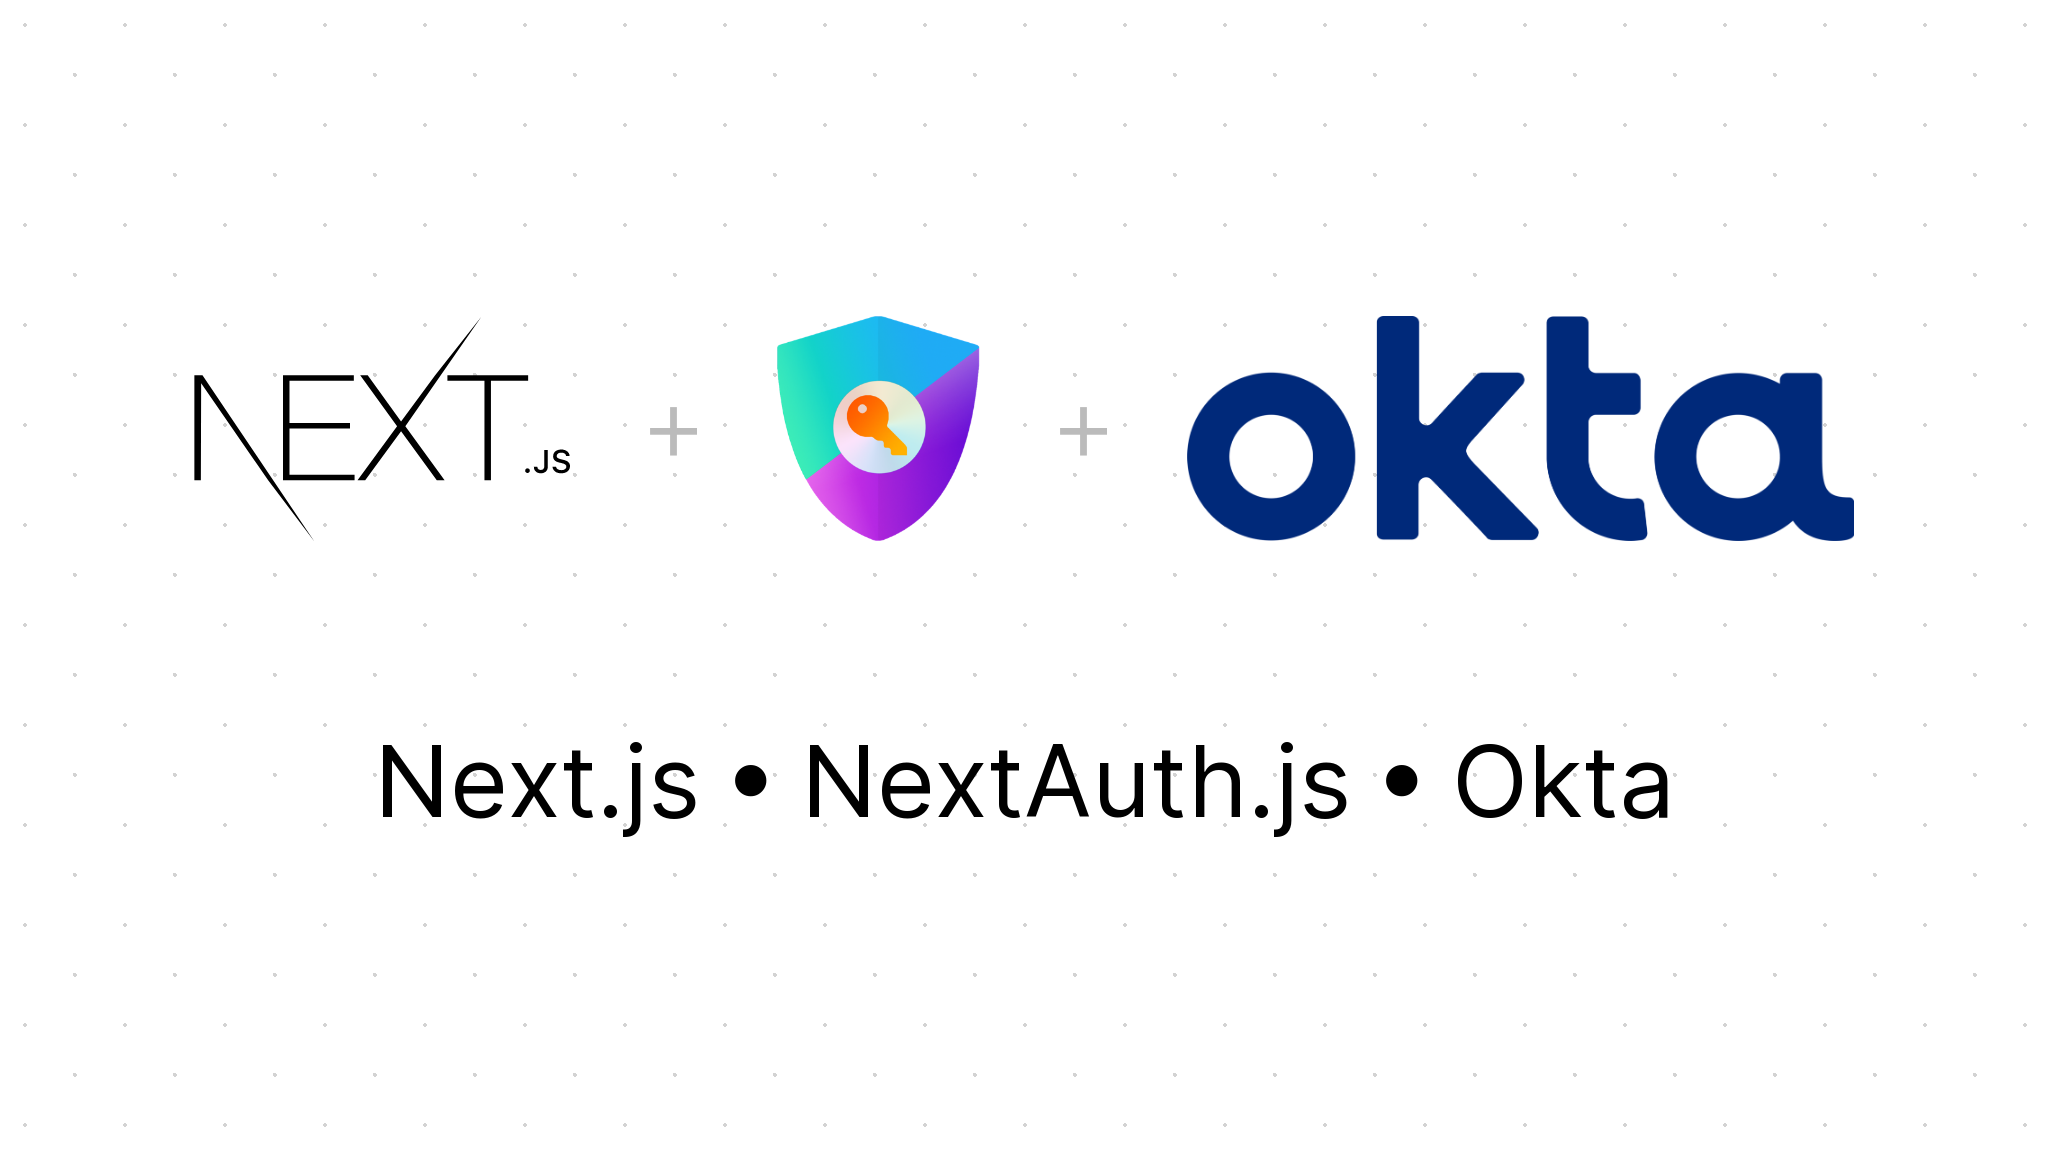 Adding Authentication to Next.js with NextAuth.js and Okta